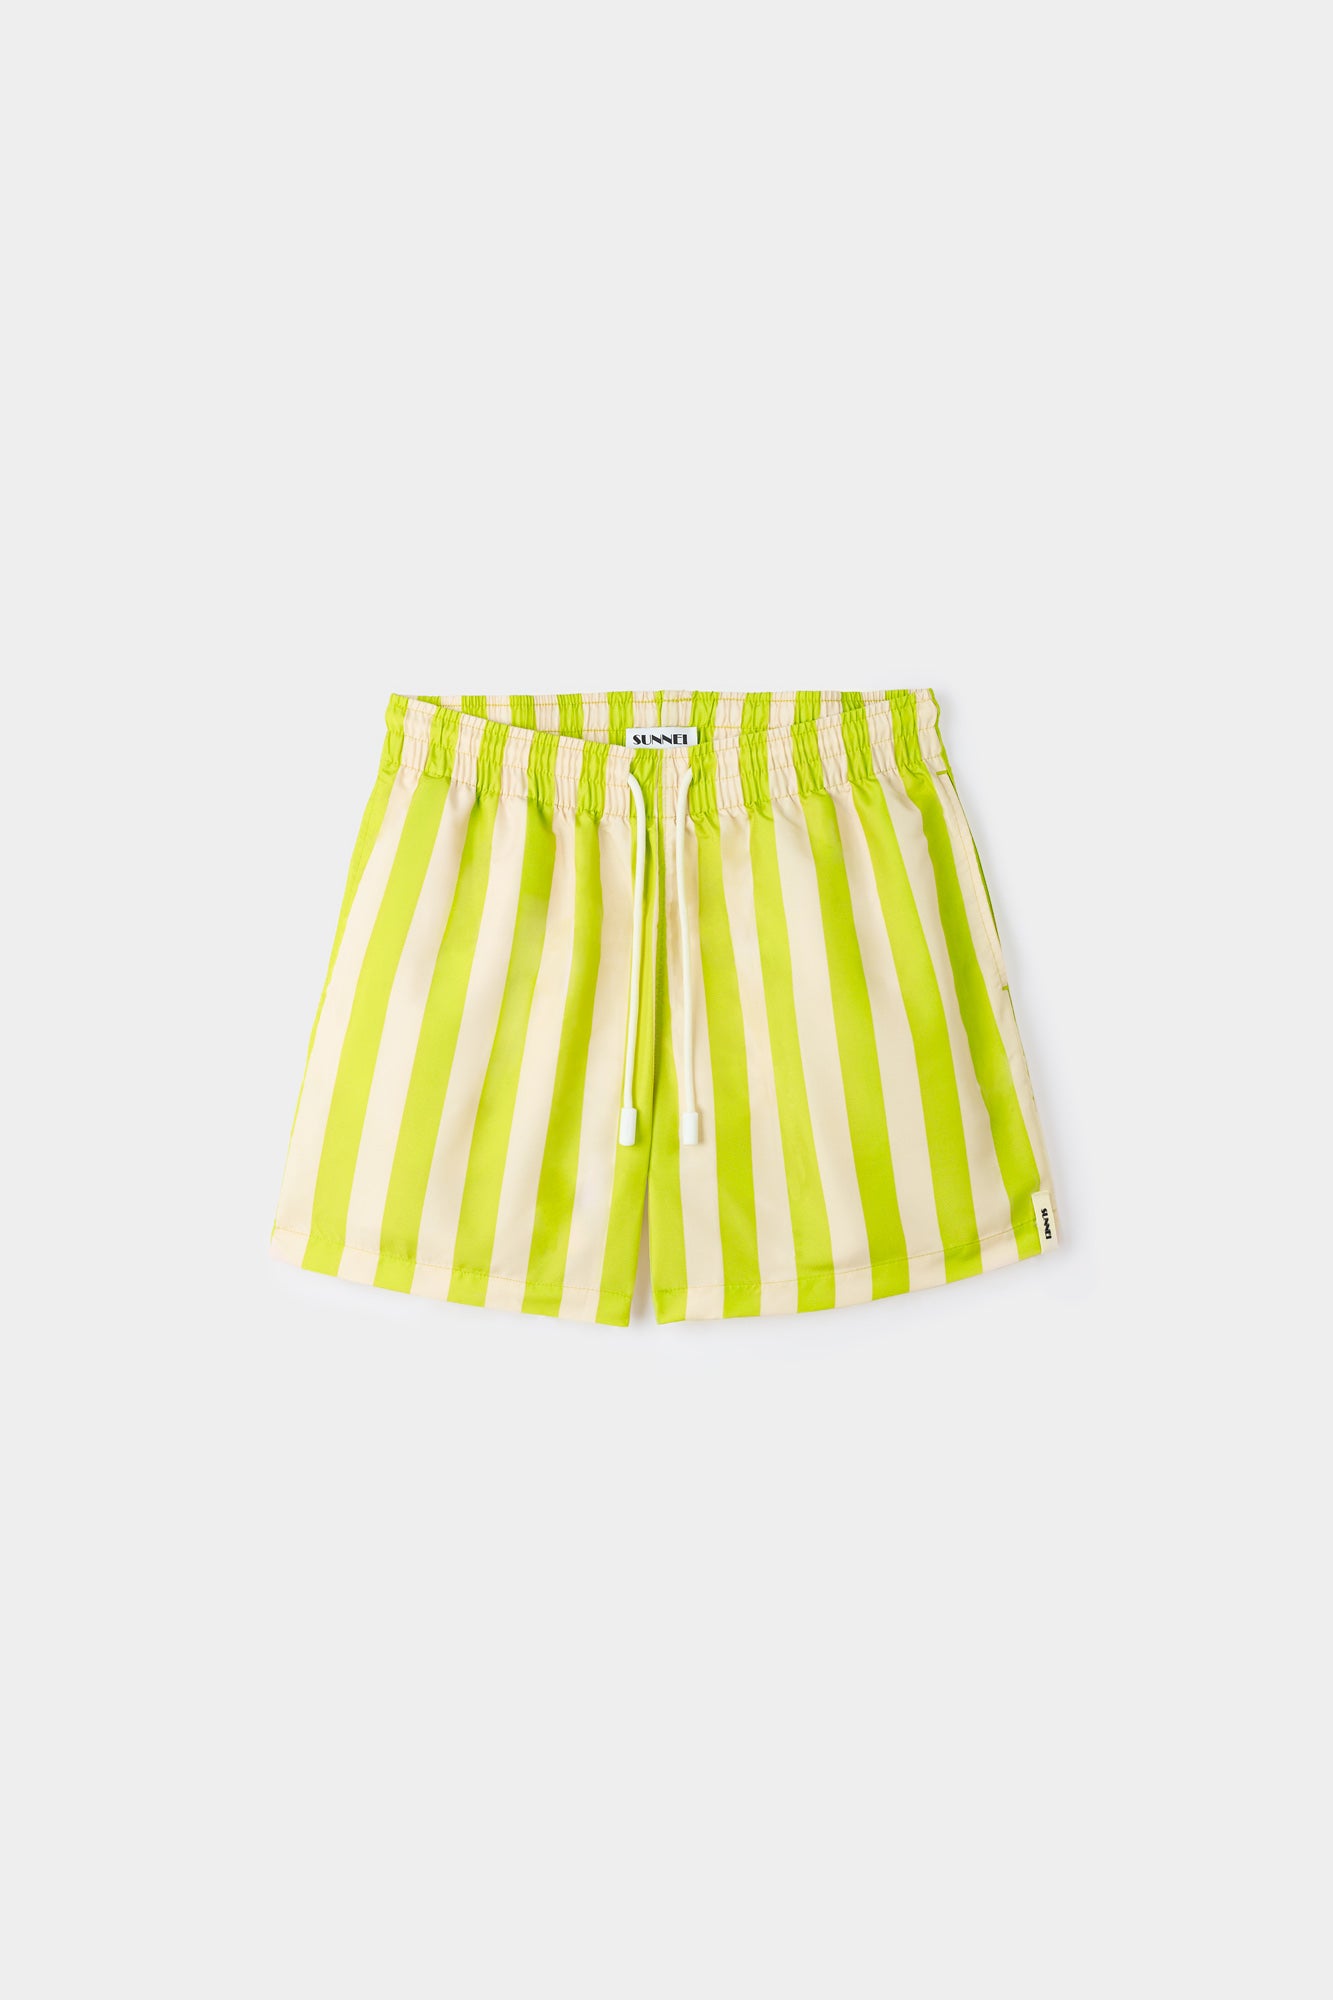 SWIMSHORTS / beige and yellow stripes